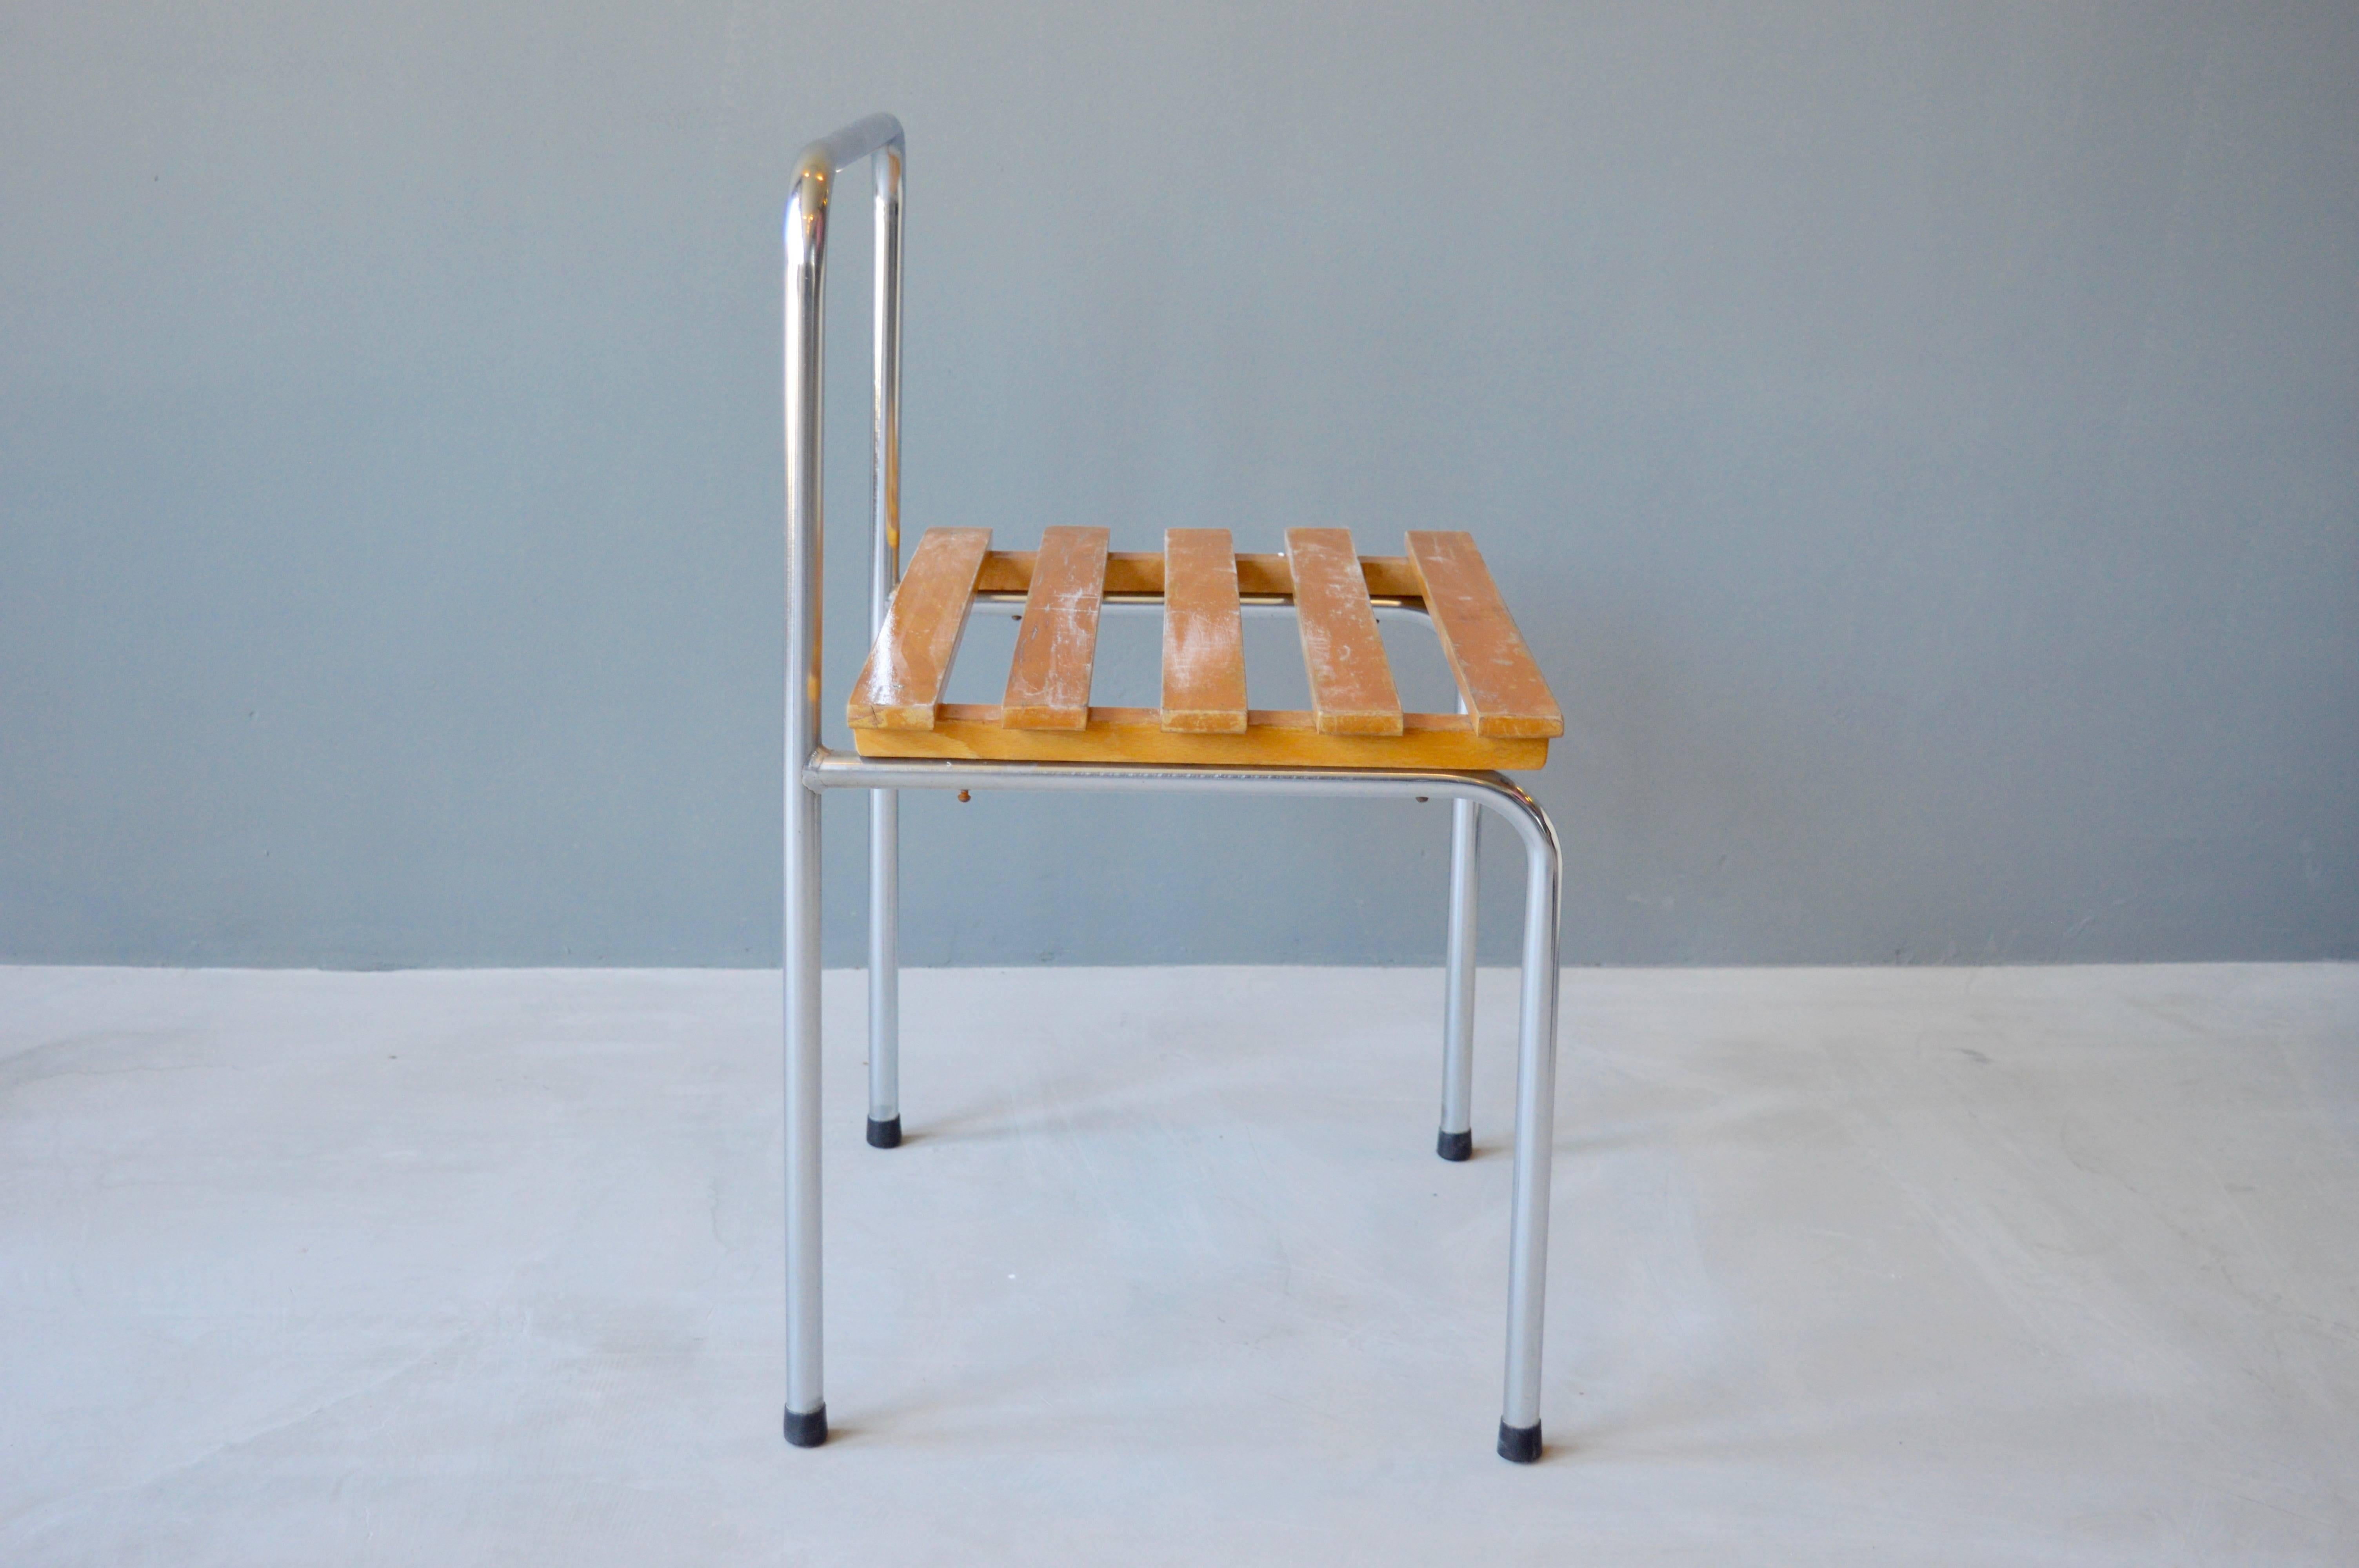 Charlotte Perriand Luggage Racks-Stools for Les Arcs In Excellent Condition For Sale In Los Angeles, CA